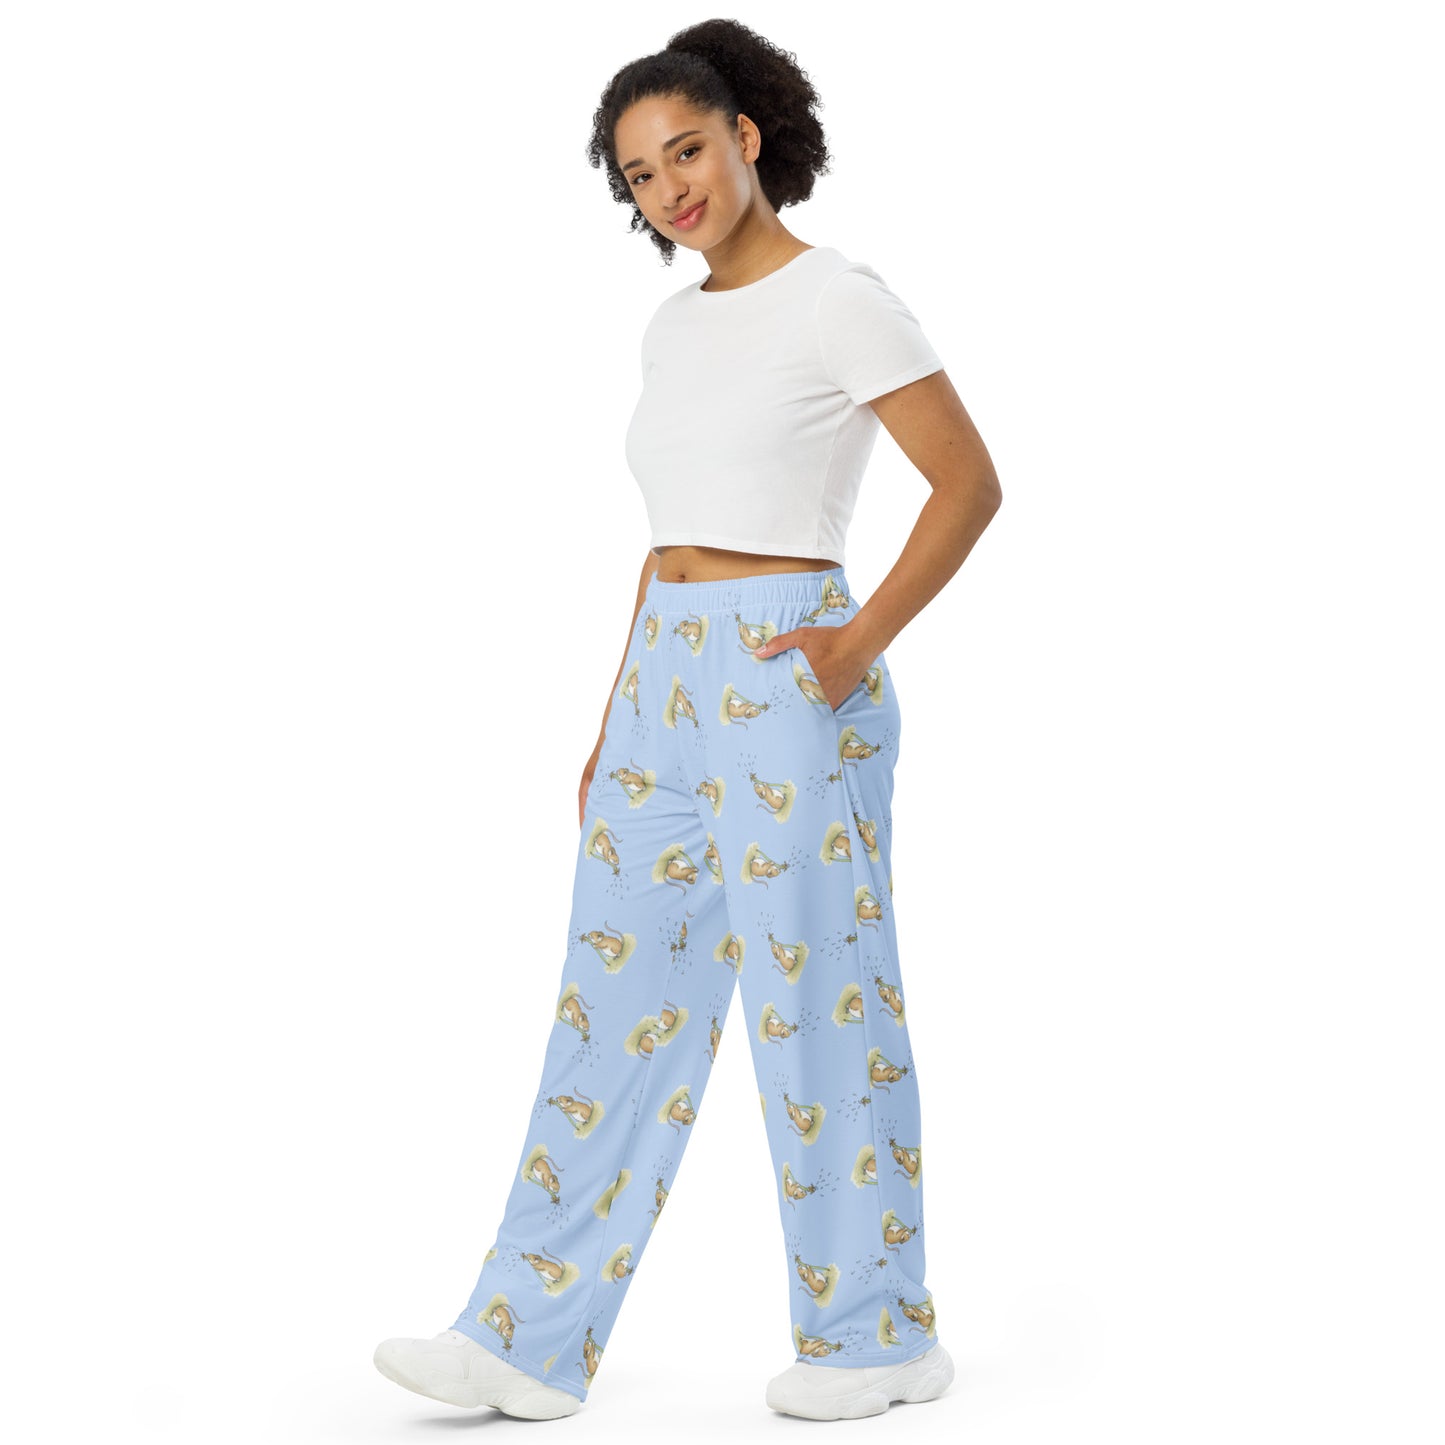 Unisex wide leg polyester pajama pants. Features dandelion wish patterned design on a light blue fabric. Has elastic waistband and white drawstring. Side pockets. Shown on female model.